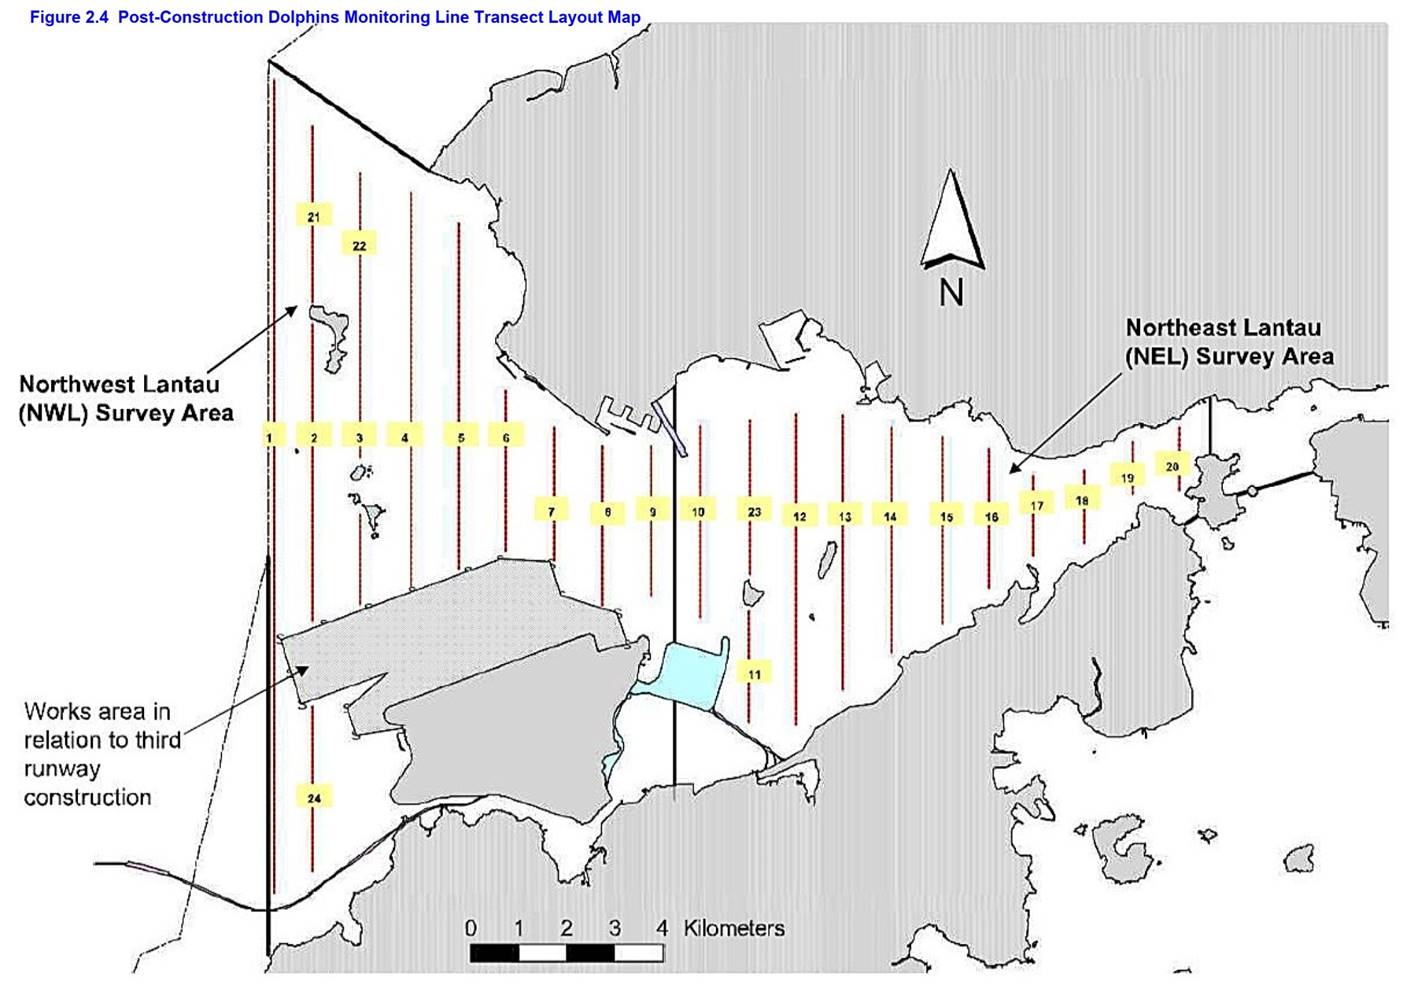 Figure 2_4 Dolphin monitoring transect surveys_r3 (post-construction)